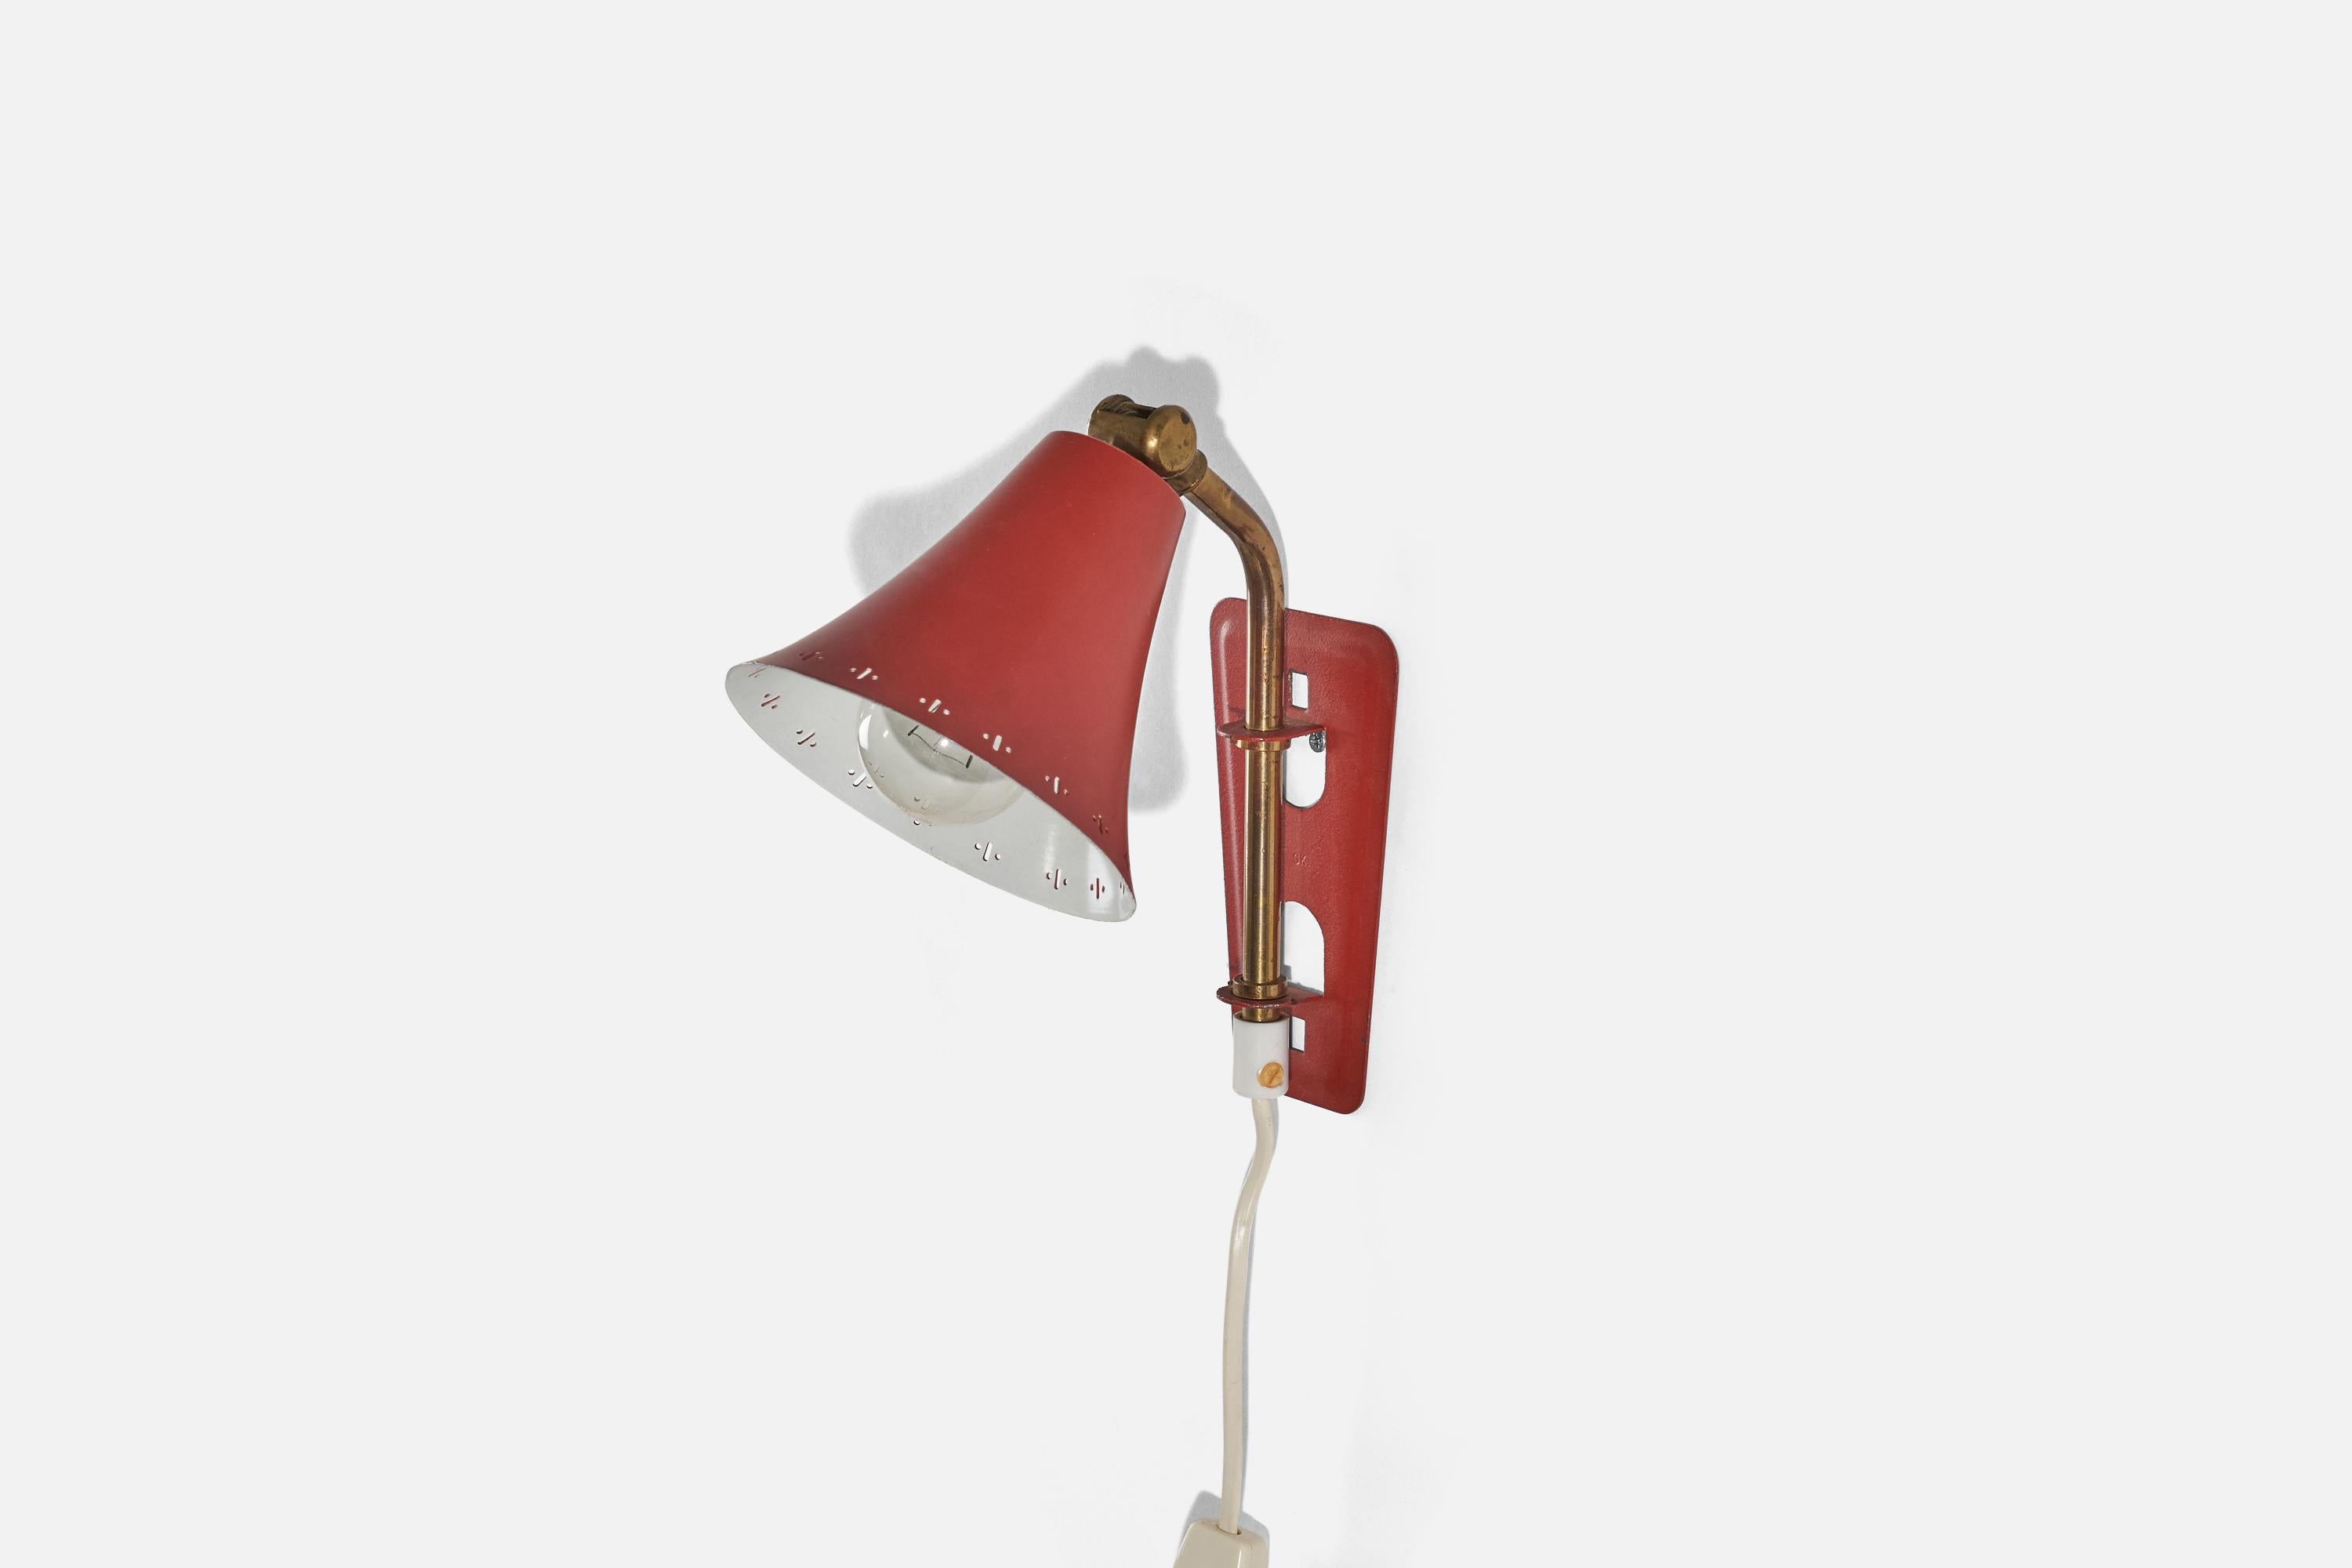 A brass and red metal wall light designed and produced in Sweden, c. 1950s.

Dimensions of back plate (inches) : 2.75 x 5.125 x .125 (H x W x D).